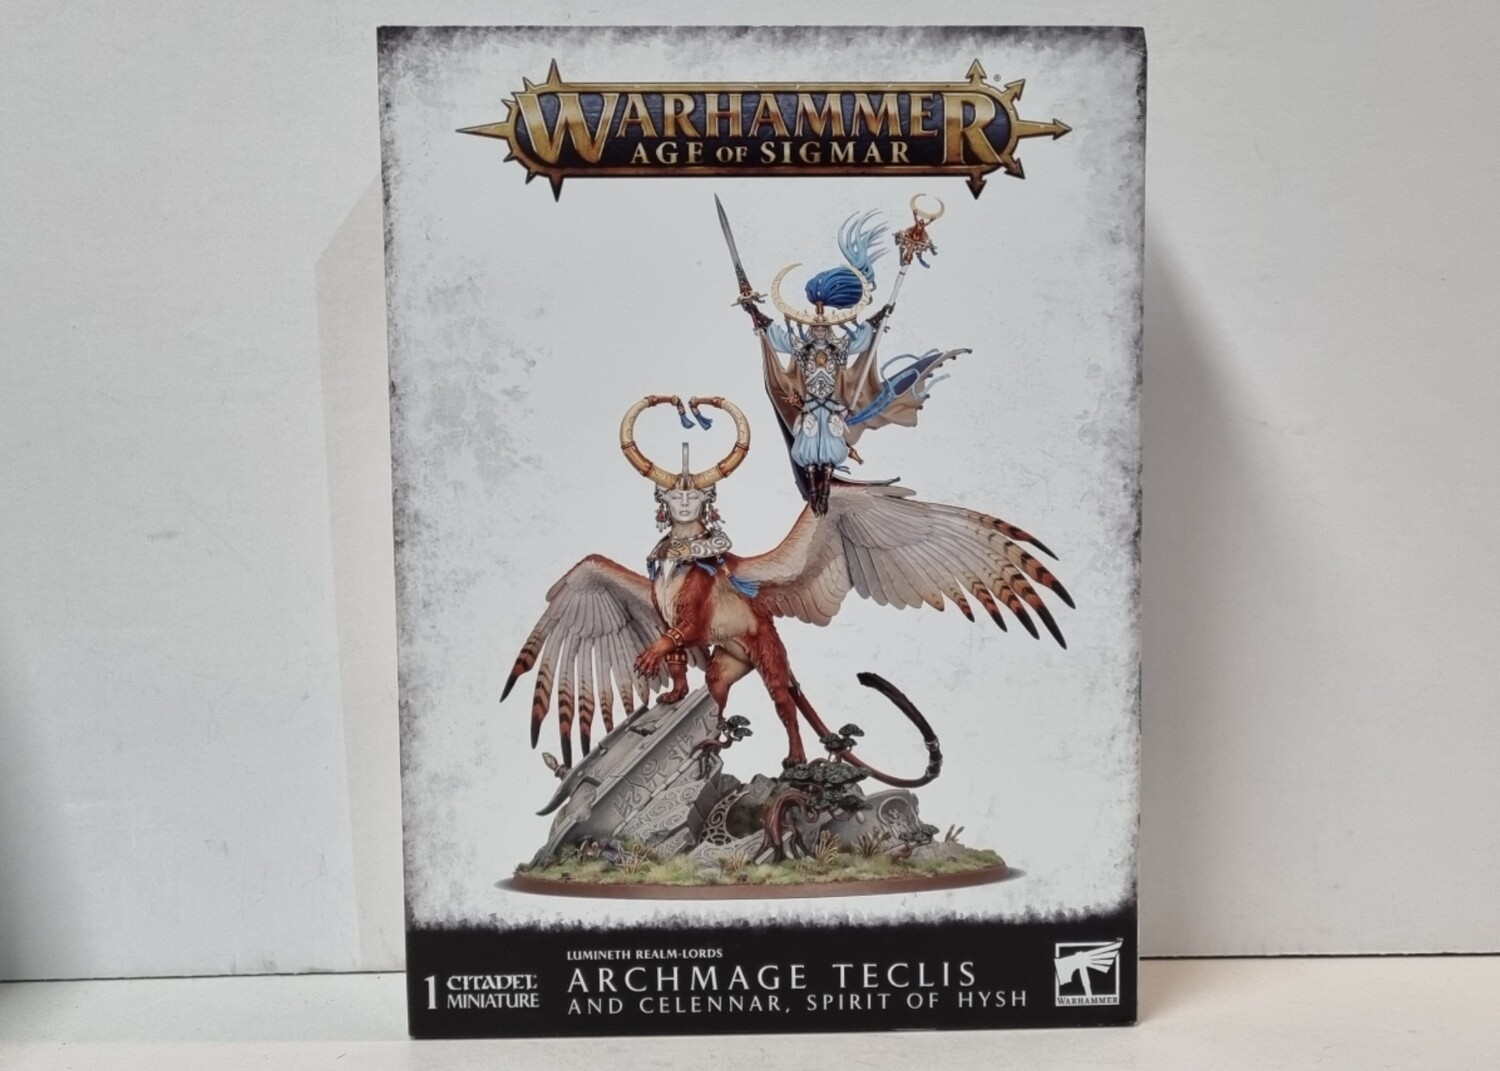 Warhammer, Age of Sigmar, 87-53, Lumineth Realm Lords: Archmage Teclis and Celennar, Spirit of Hysh